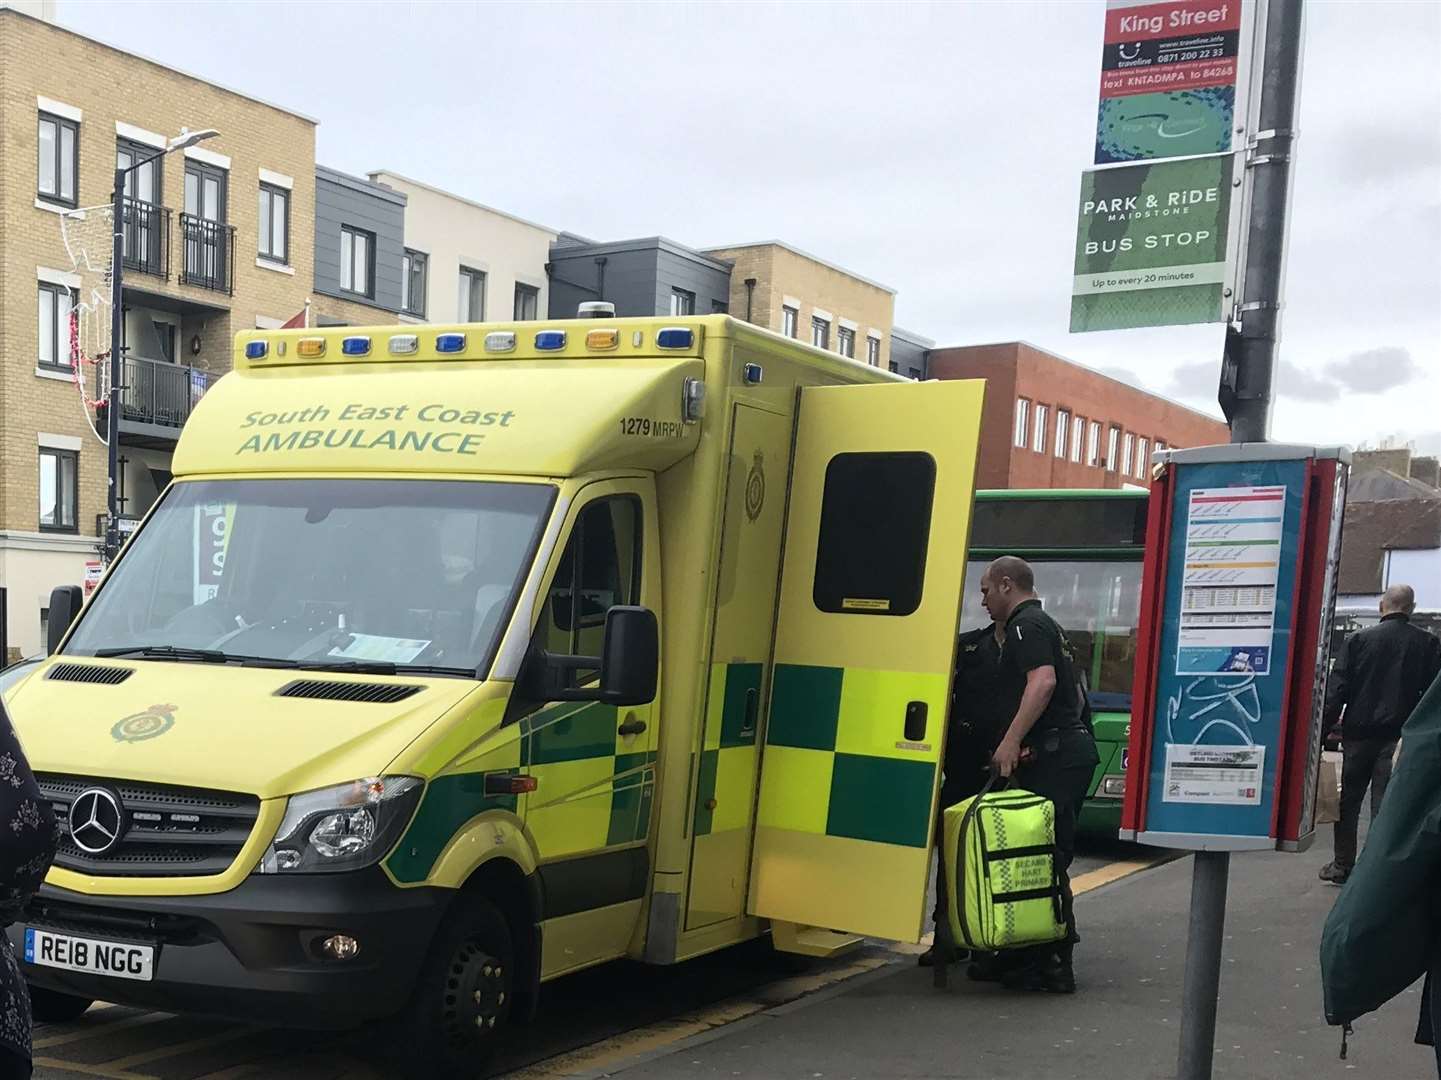 Police passed a man into the care of paramedics outside Boots in Maidstone just after 1pm